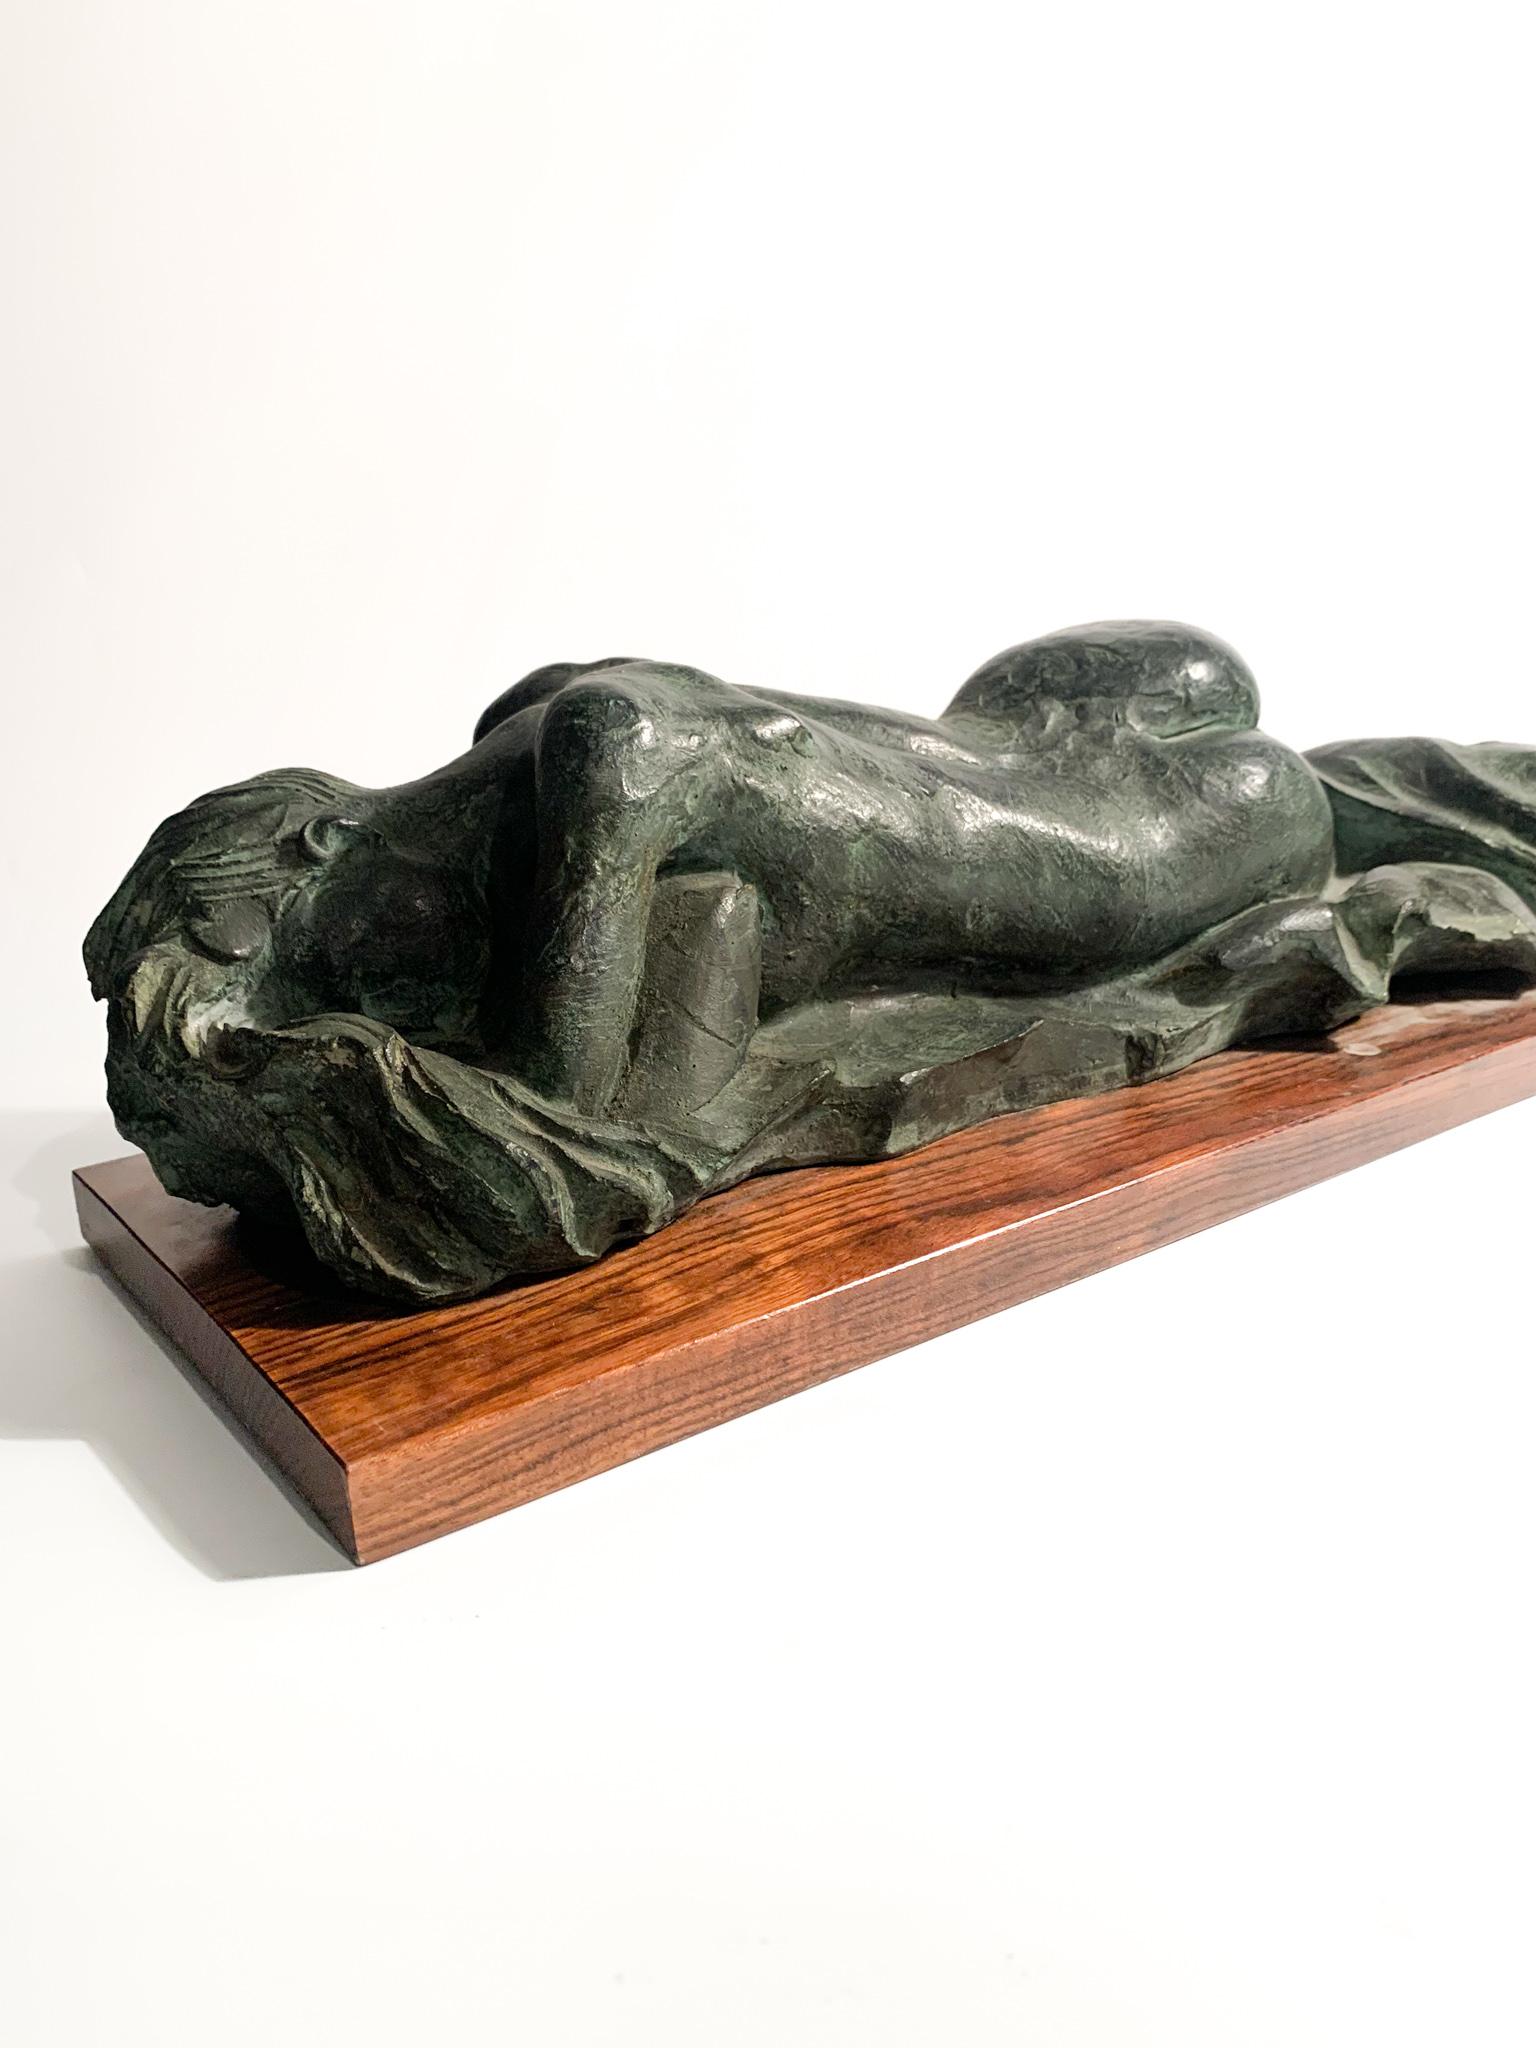 Bronze Sculpture of a Female Nude by Michele Zappino from the 1990s For Sale 2